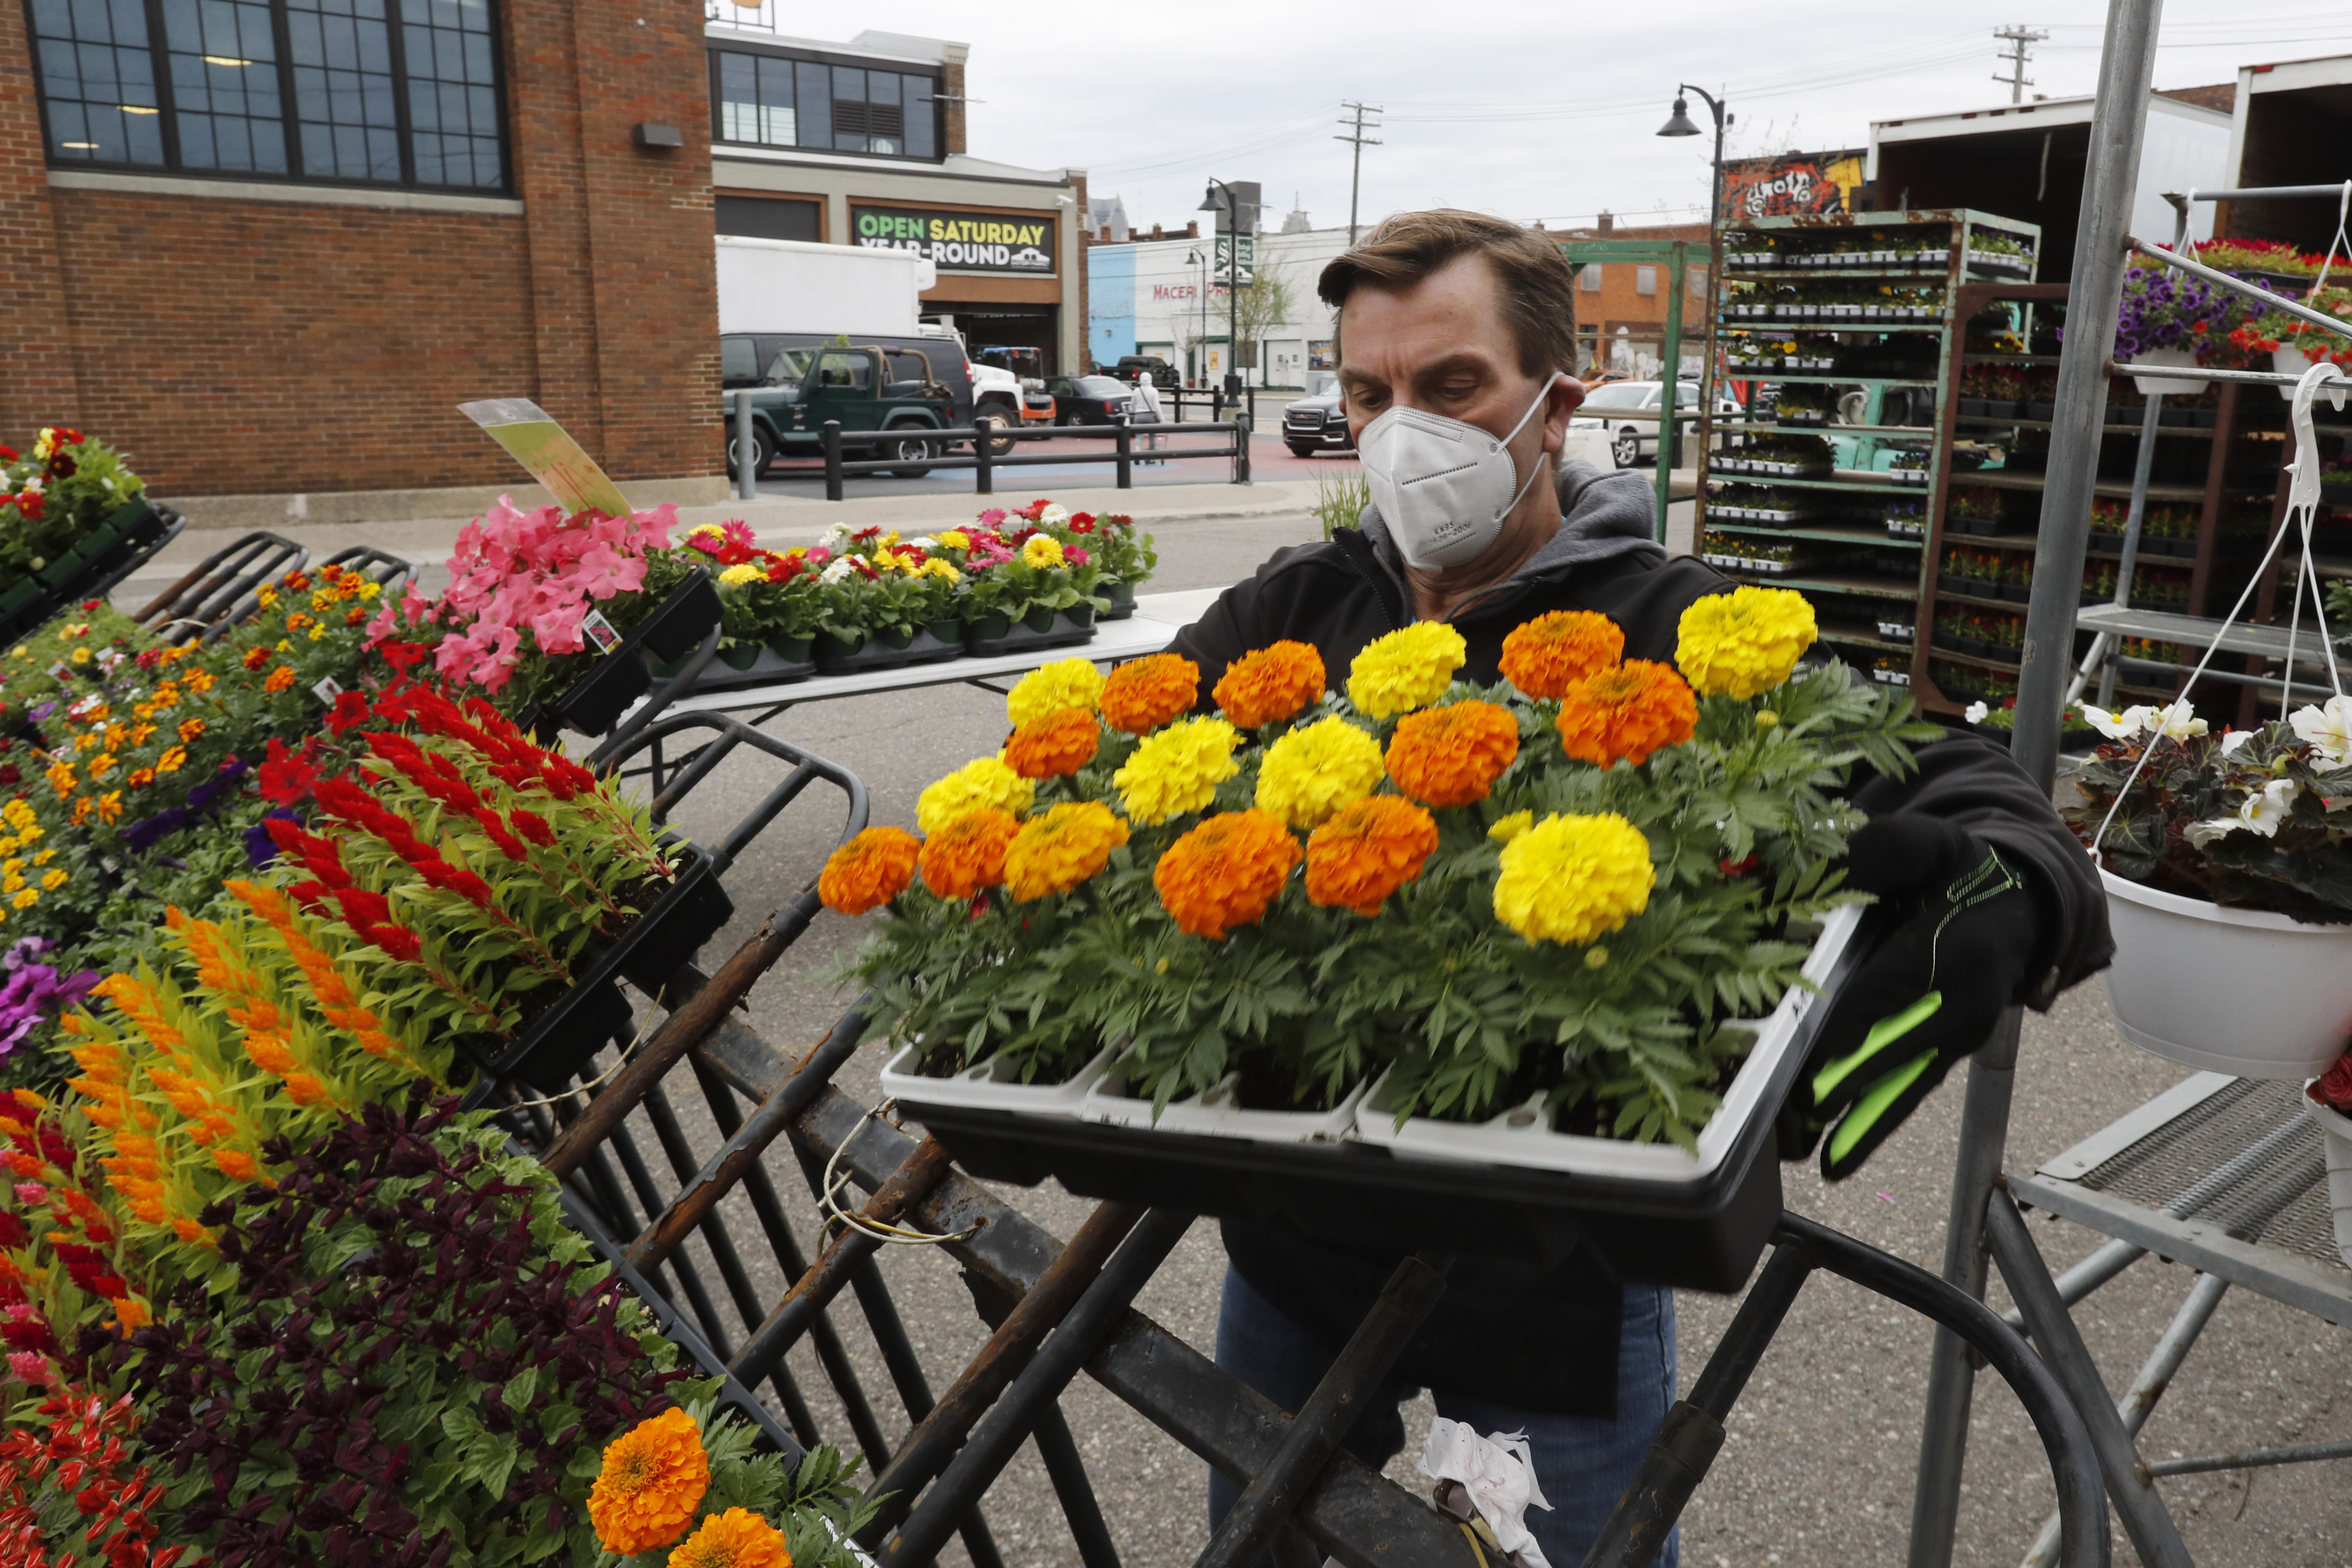 John Spens of Geier Farms sets up at the Detroit Farmers Market on May 2.